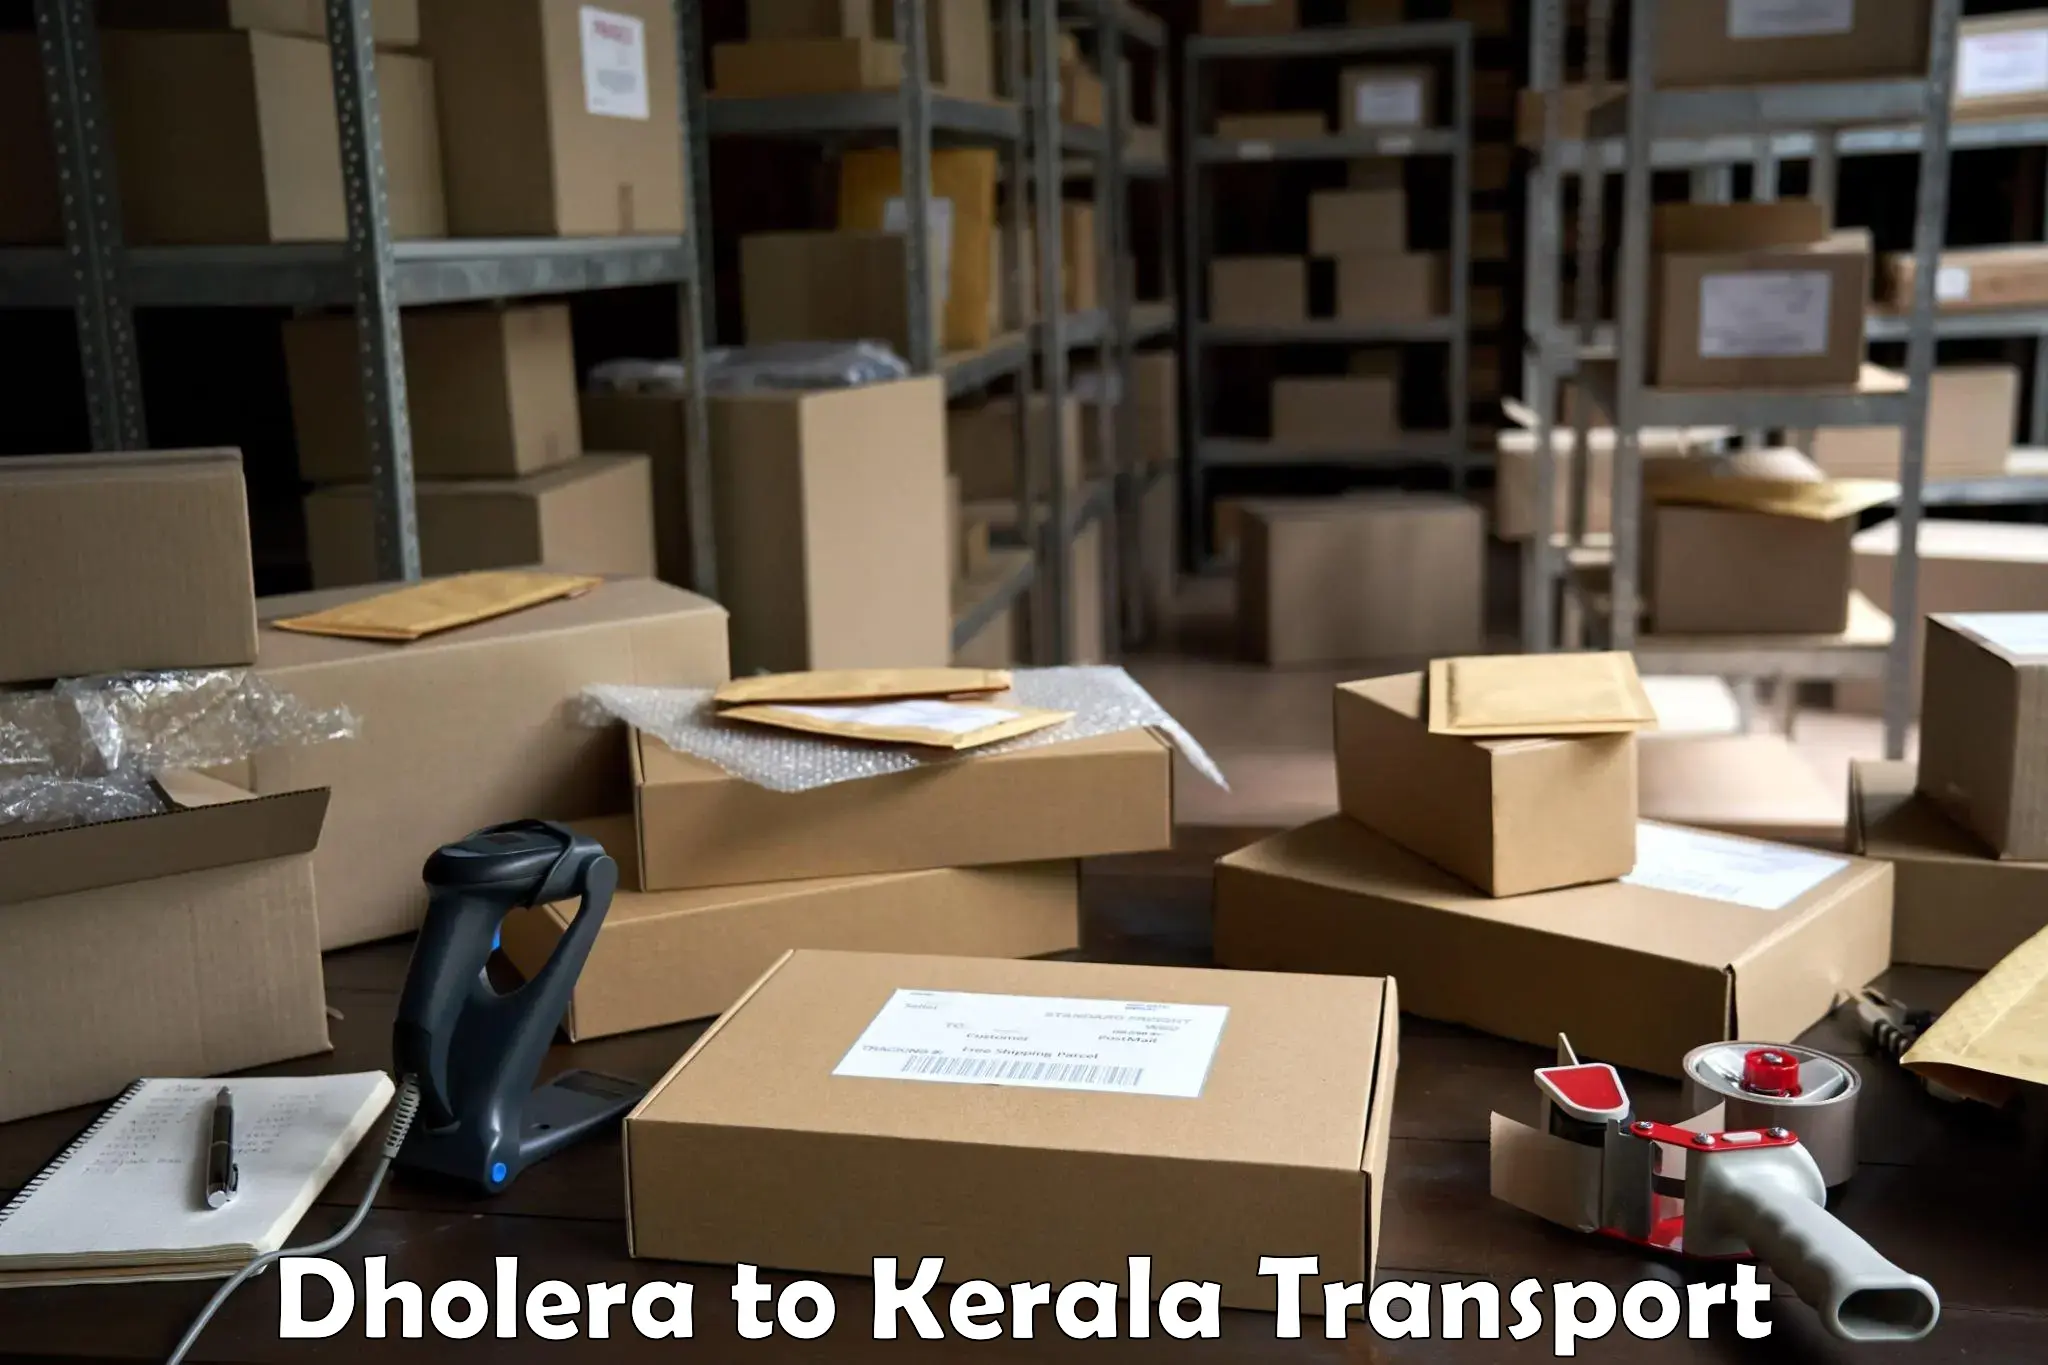 Daily parcel service transport Dholera to Cochin University of Science and Technology